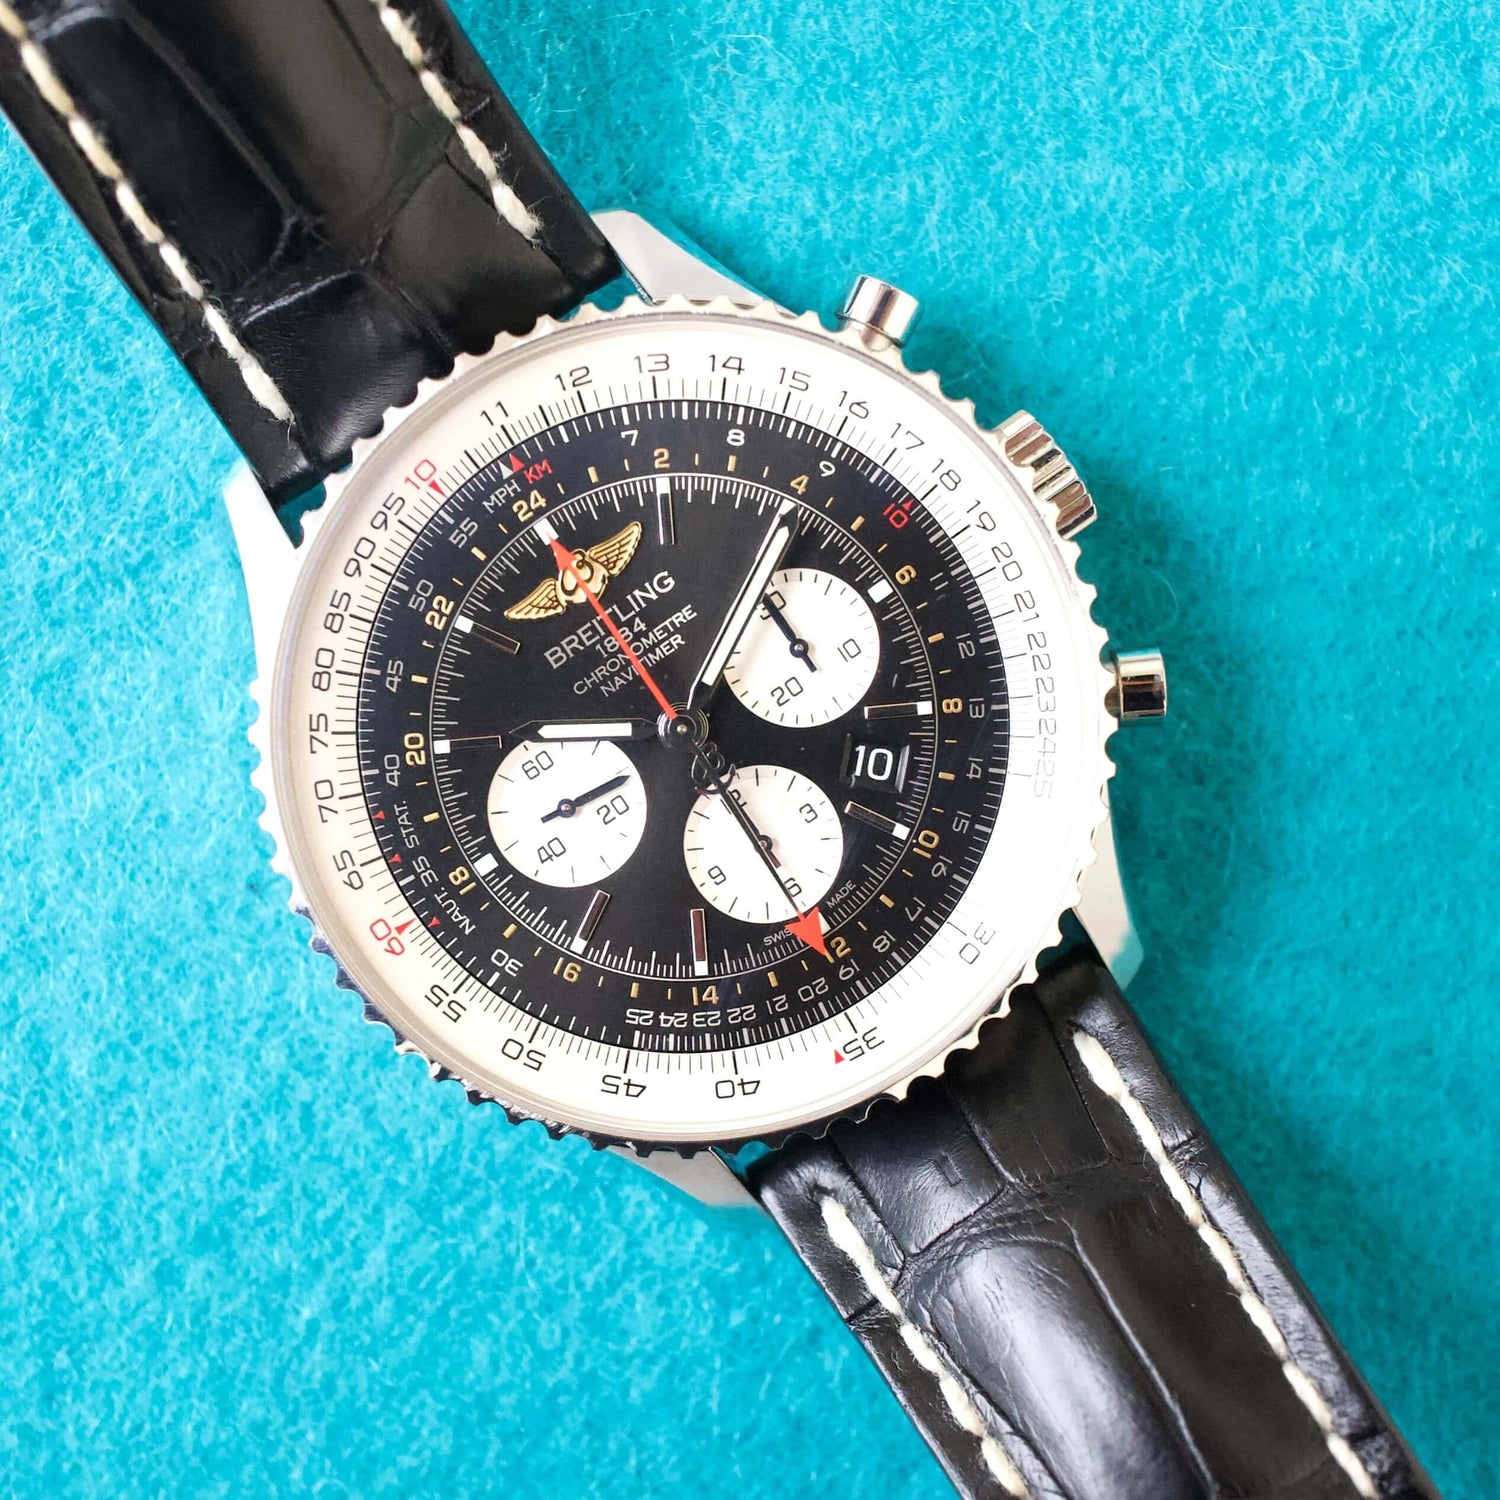 Breitling Navitimer GMT Chronograph AB04412 48MM w Factory Breitling Box (Original Retail for $10,4060) - WearingTime Luxury Watches